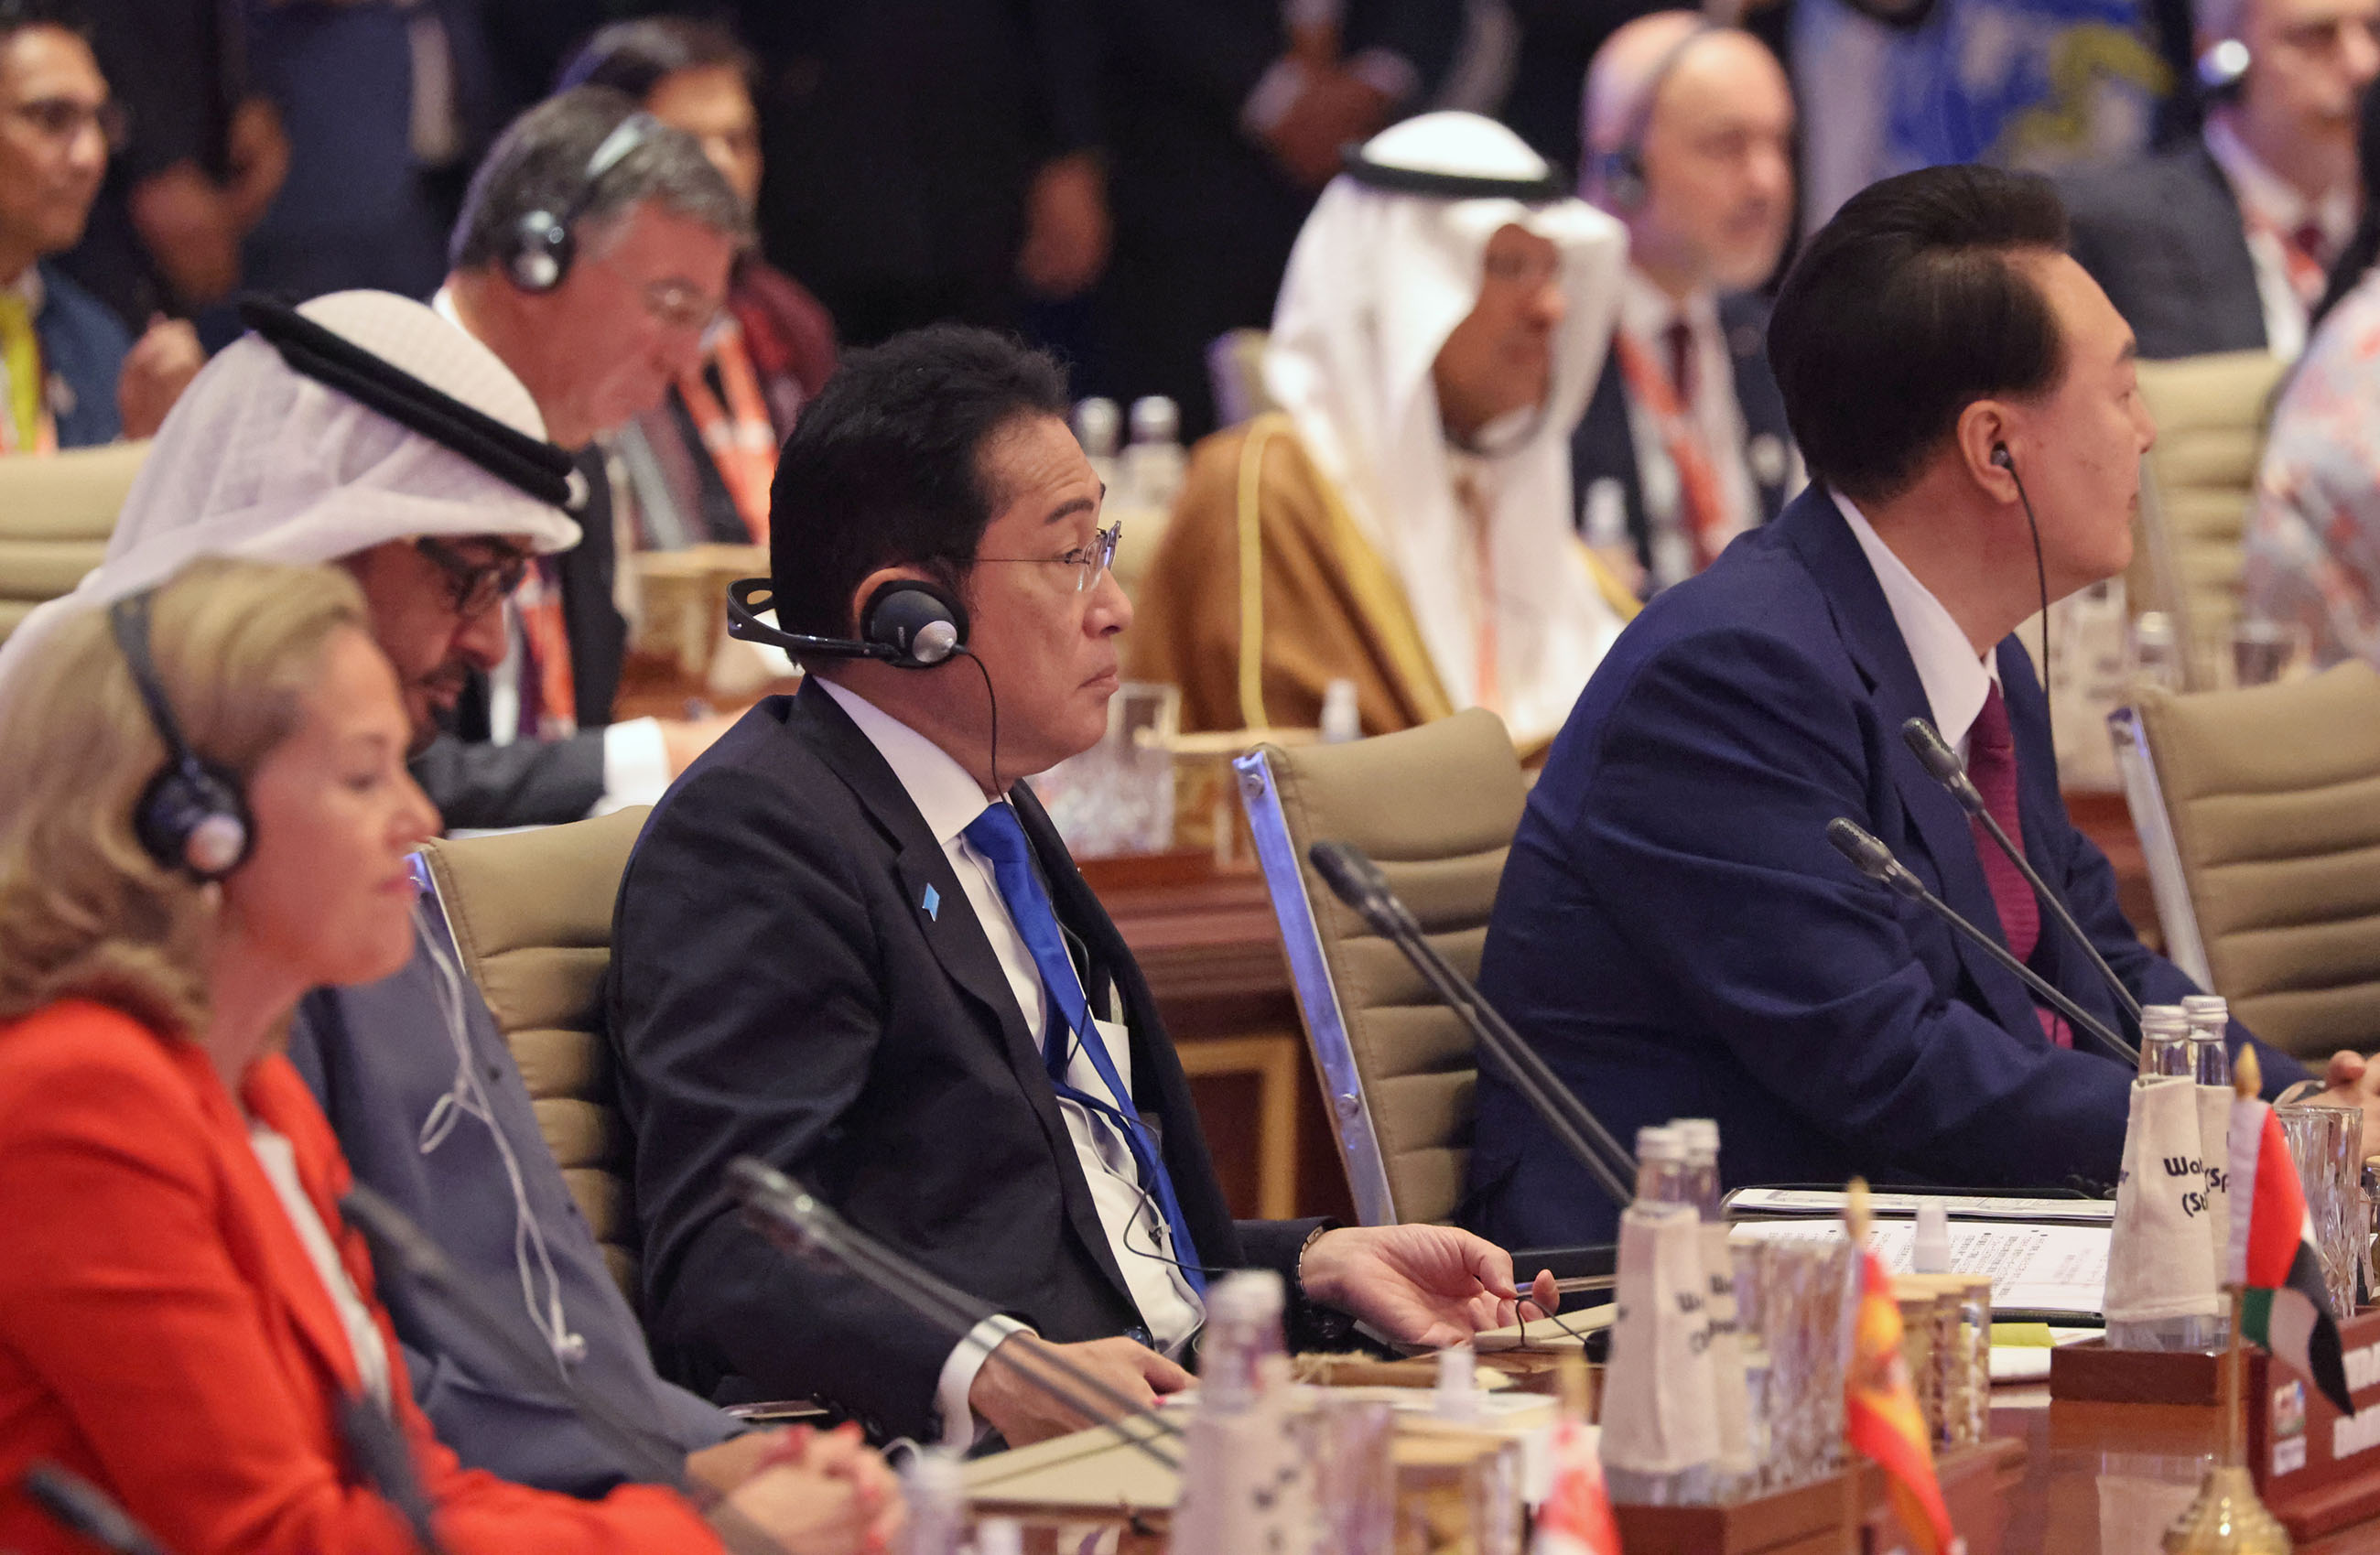 Prime Minister Kishida attending Session 1 and Working Lunch (3)